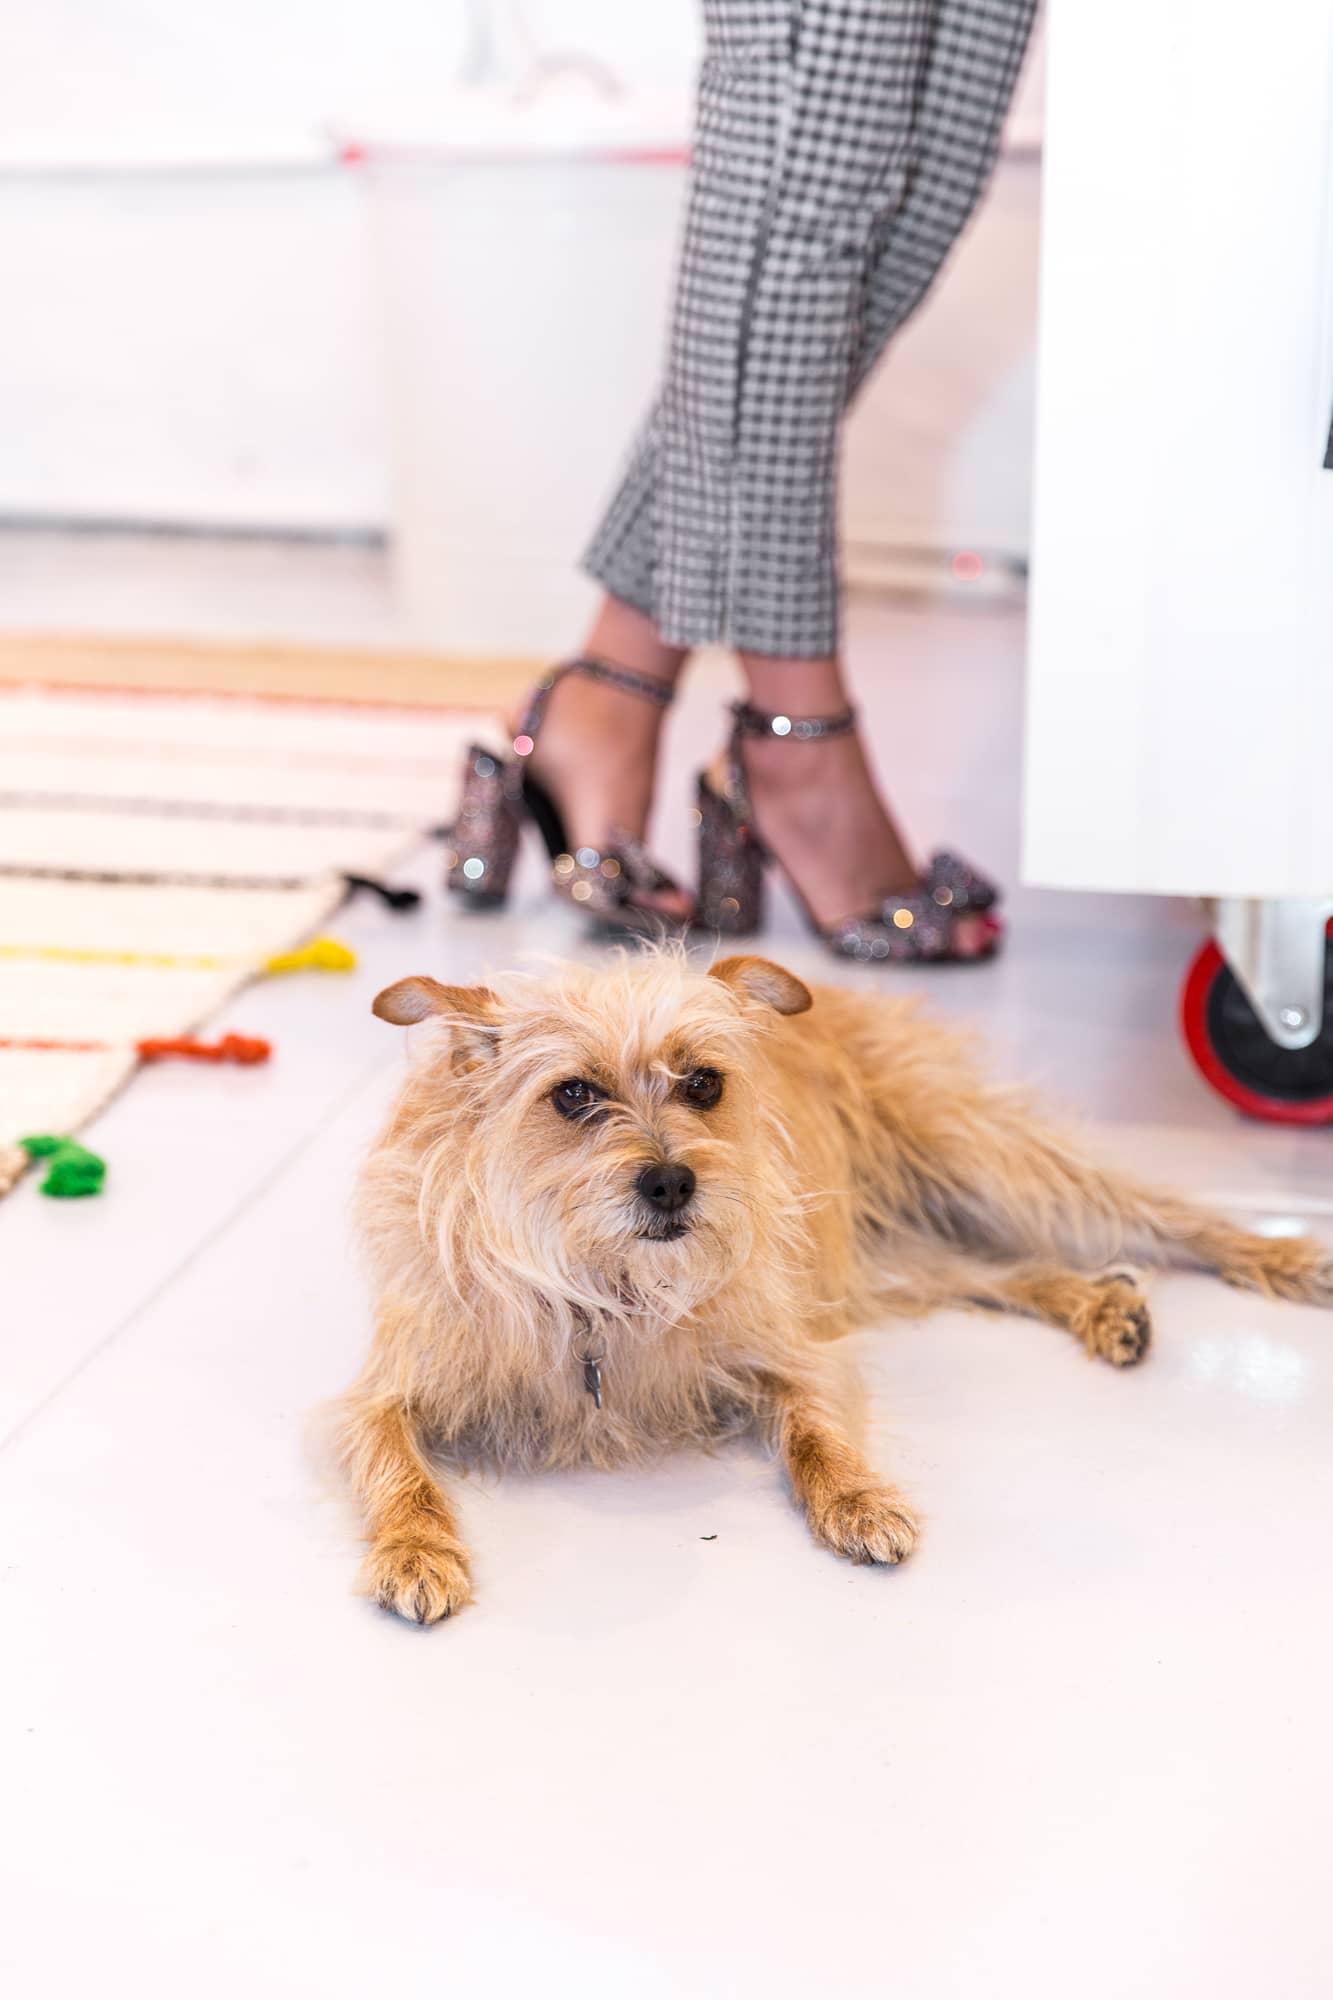 Cairn Terrier lays attentively on the floor in front of a woman's legs